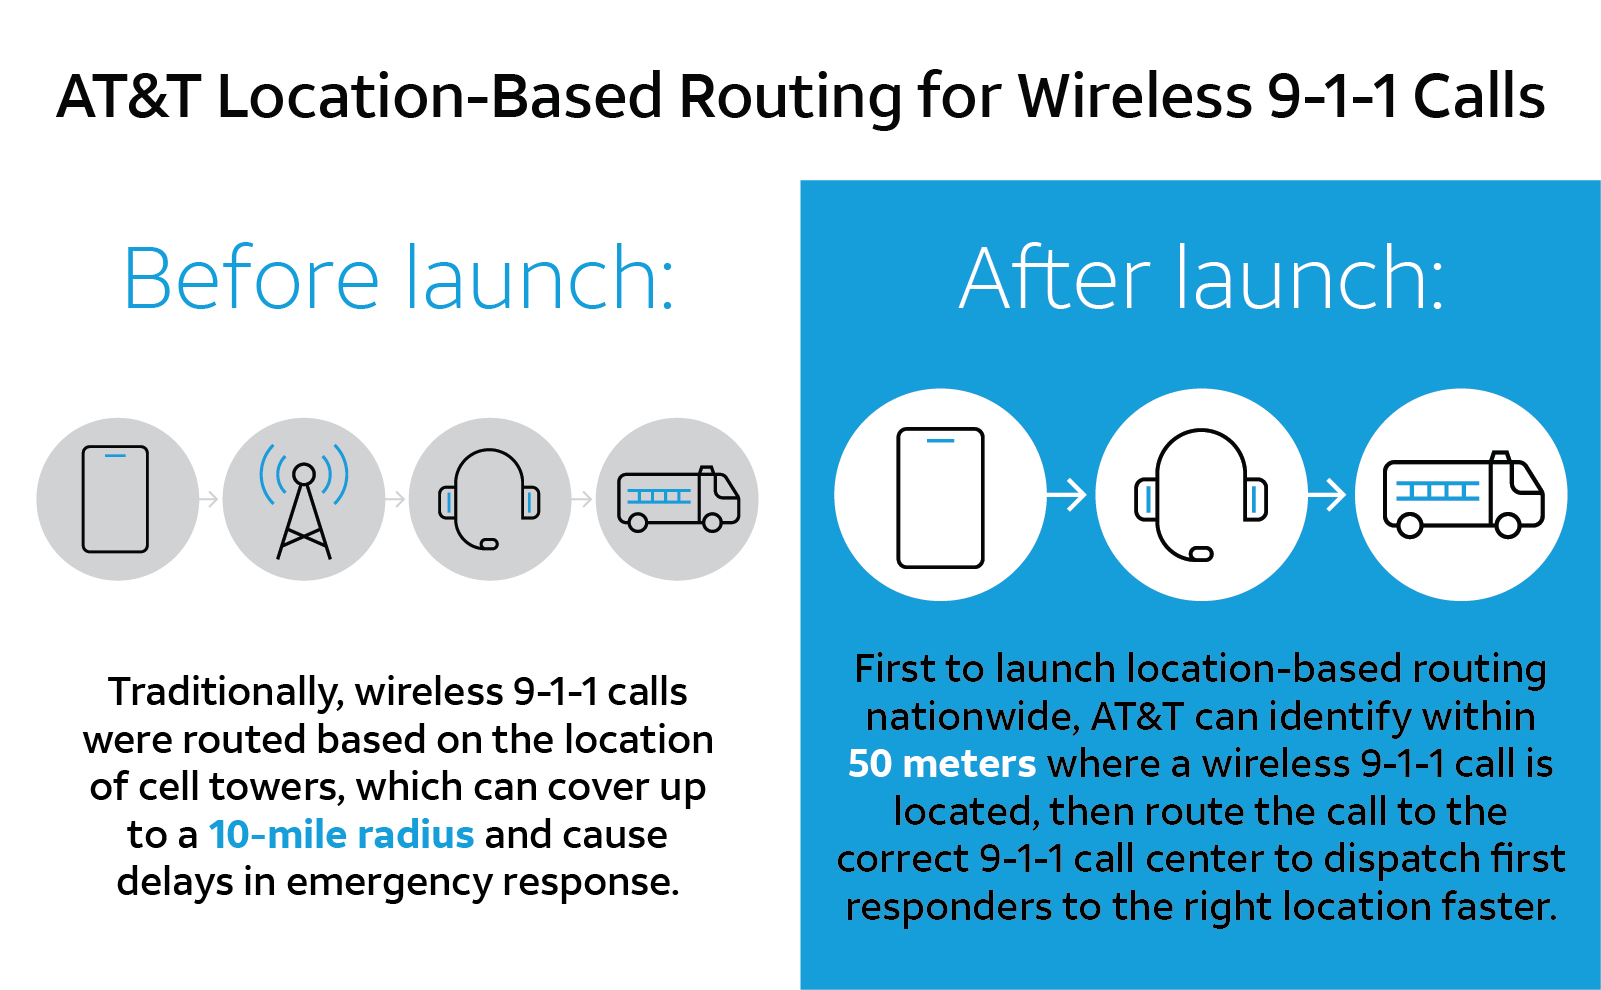 Location-Based Routing for Wireless 911 Calls 04.28.22_new